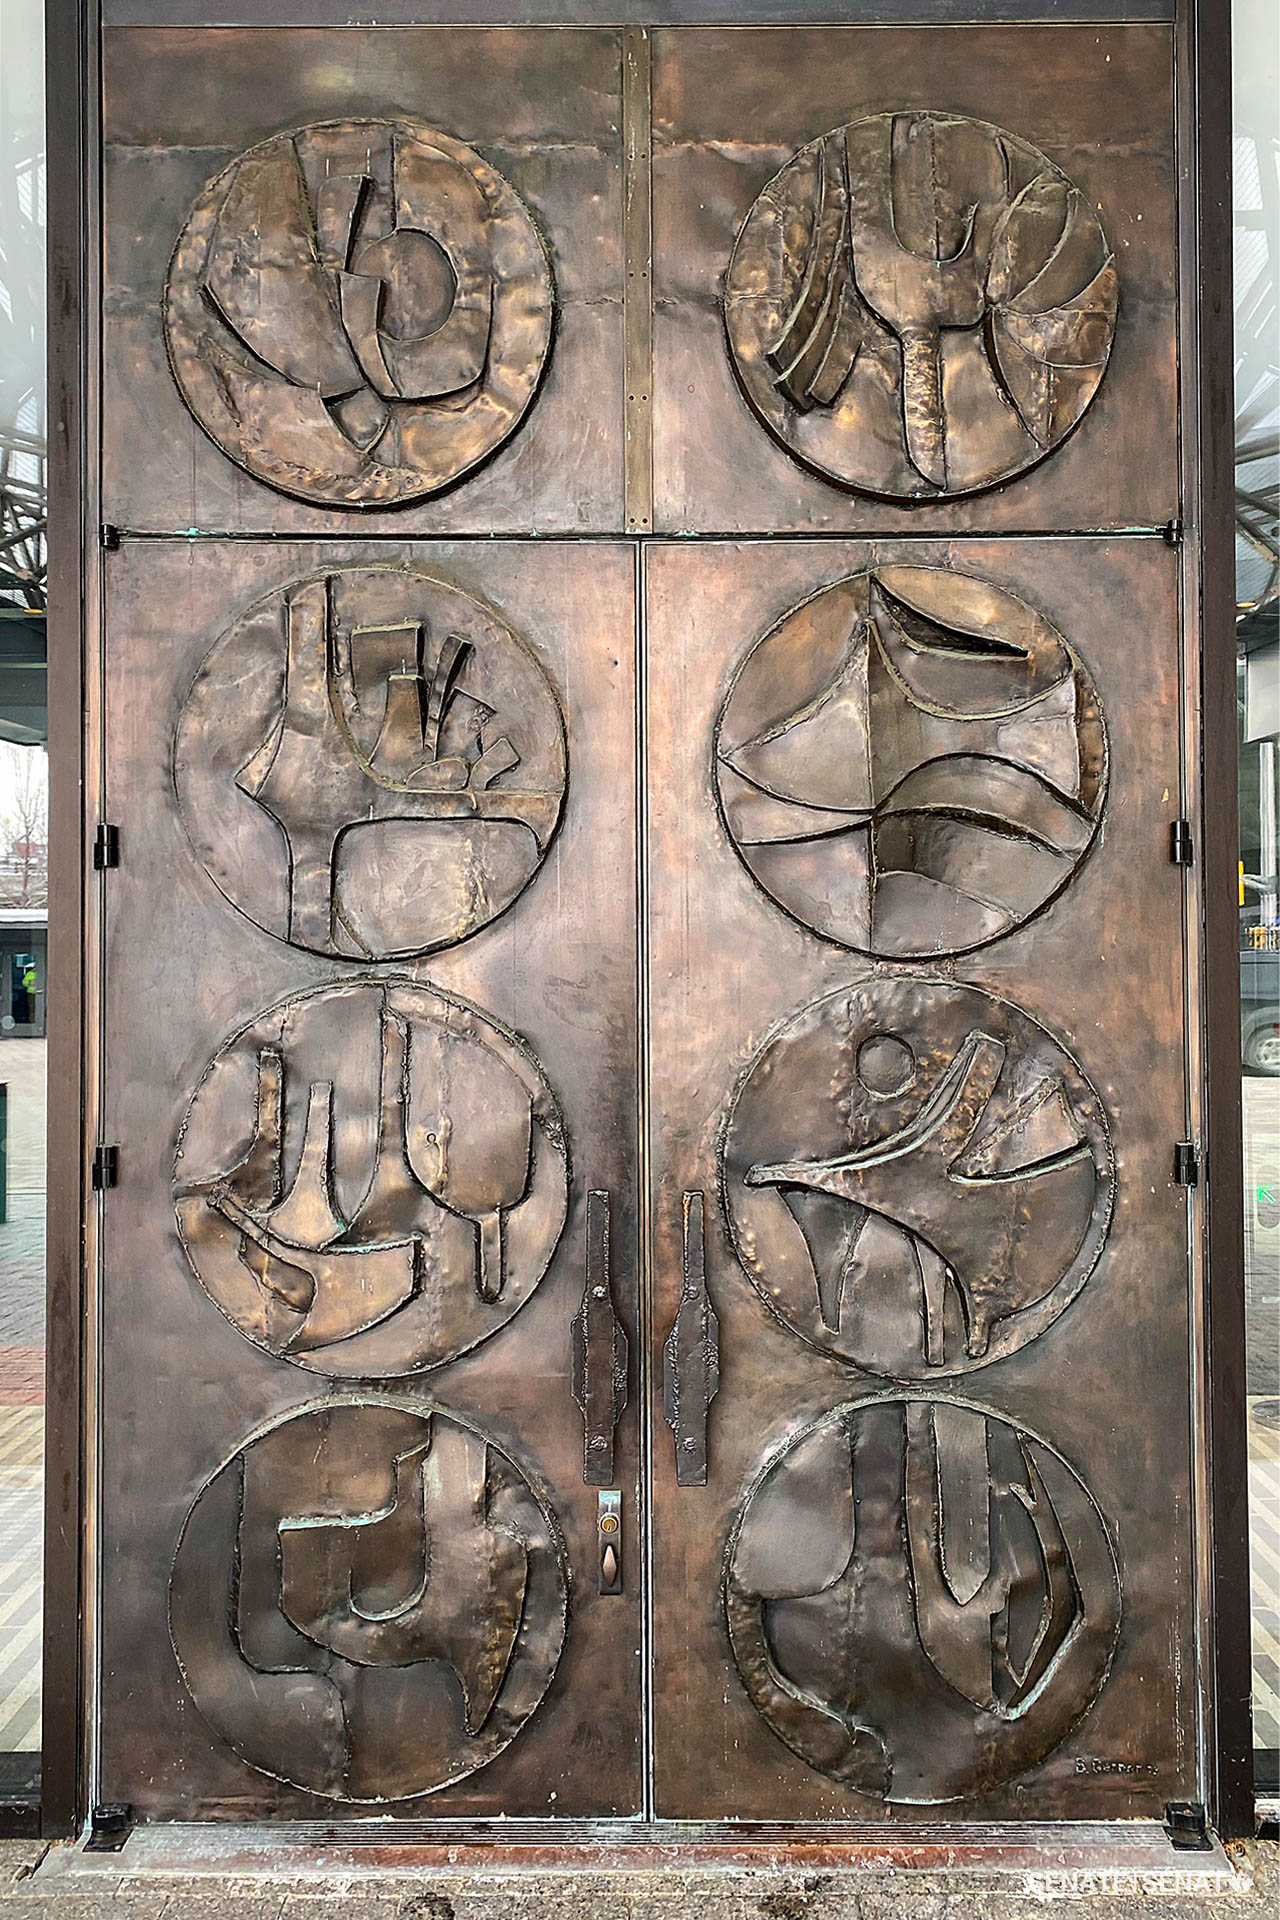 Ottawa sculptor Bruce Garner created these massive bronze doors in 1973 as Ottawa’s former downtown train station, now the Senate of Canada Building, was being renovated to become the Government Conference Centre. The eight roundels celebrate Canada’s regions with abstract depictions of landscapes and wildlife. (Bruce Garner, <em>Reflections of Canada</em>, 1973. Bronze, H: 5.5m x W: 3.5m x D: 0.5m)